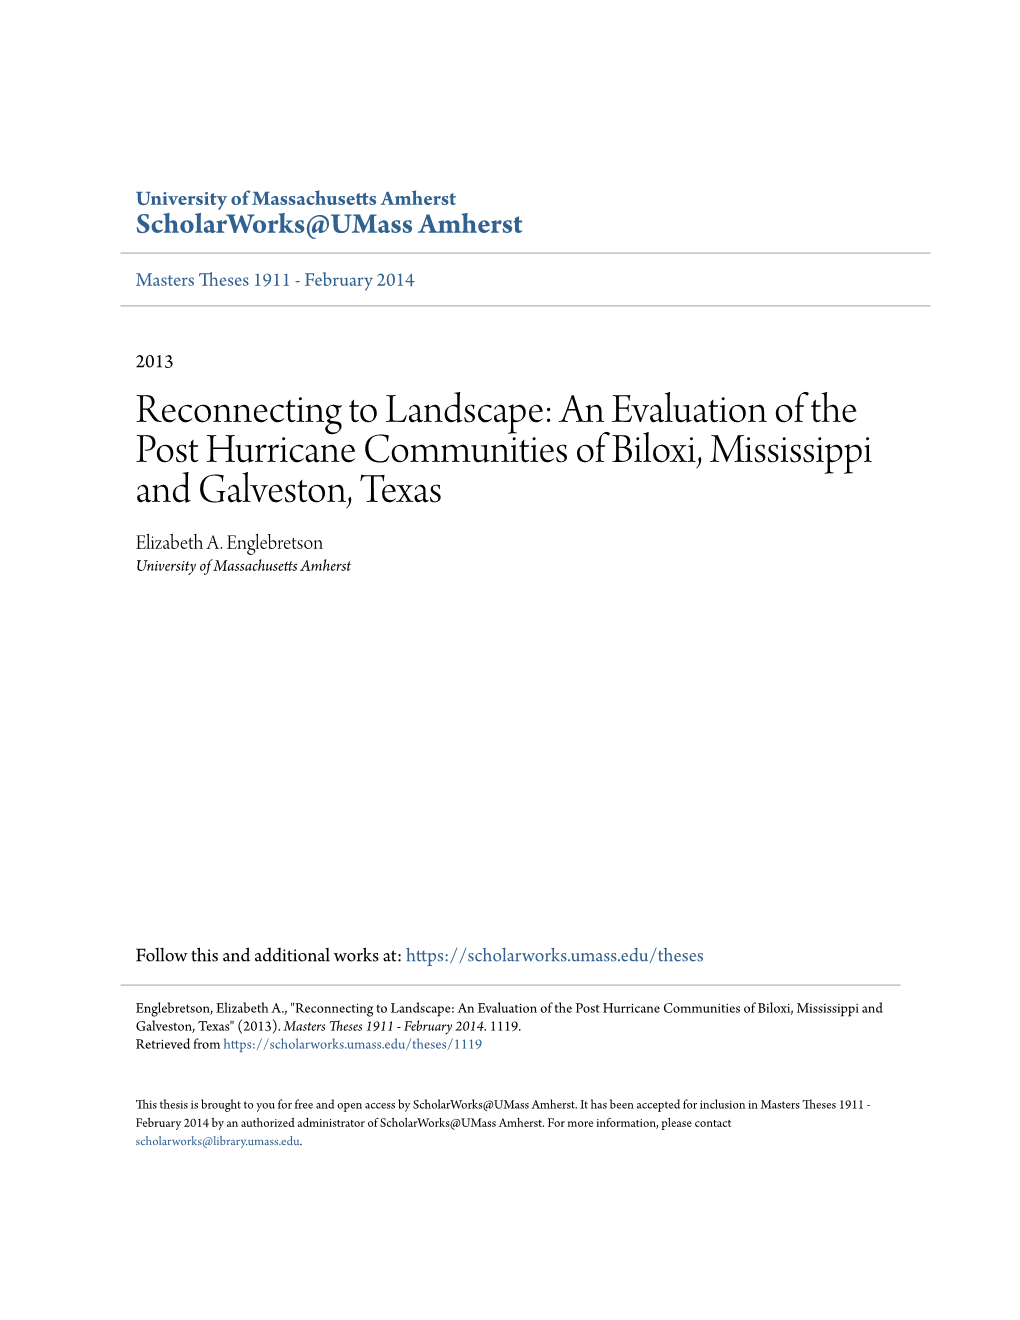 An Evaluation of the Post Hurricane Communities of Biloxi, Mississippi and Galveston, Texas Elizabeth A